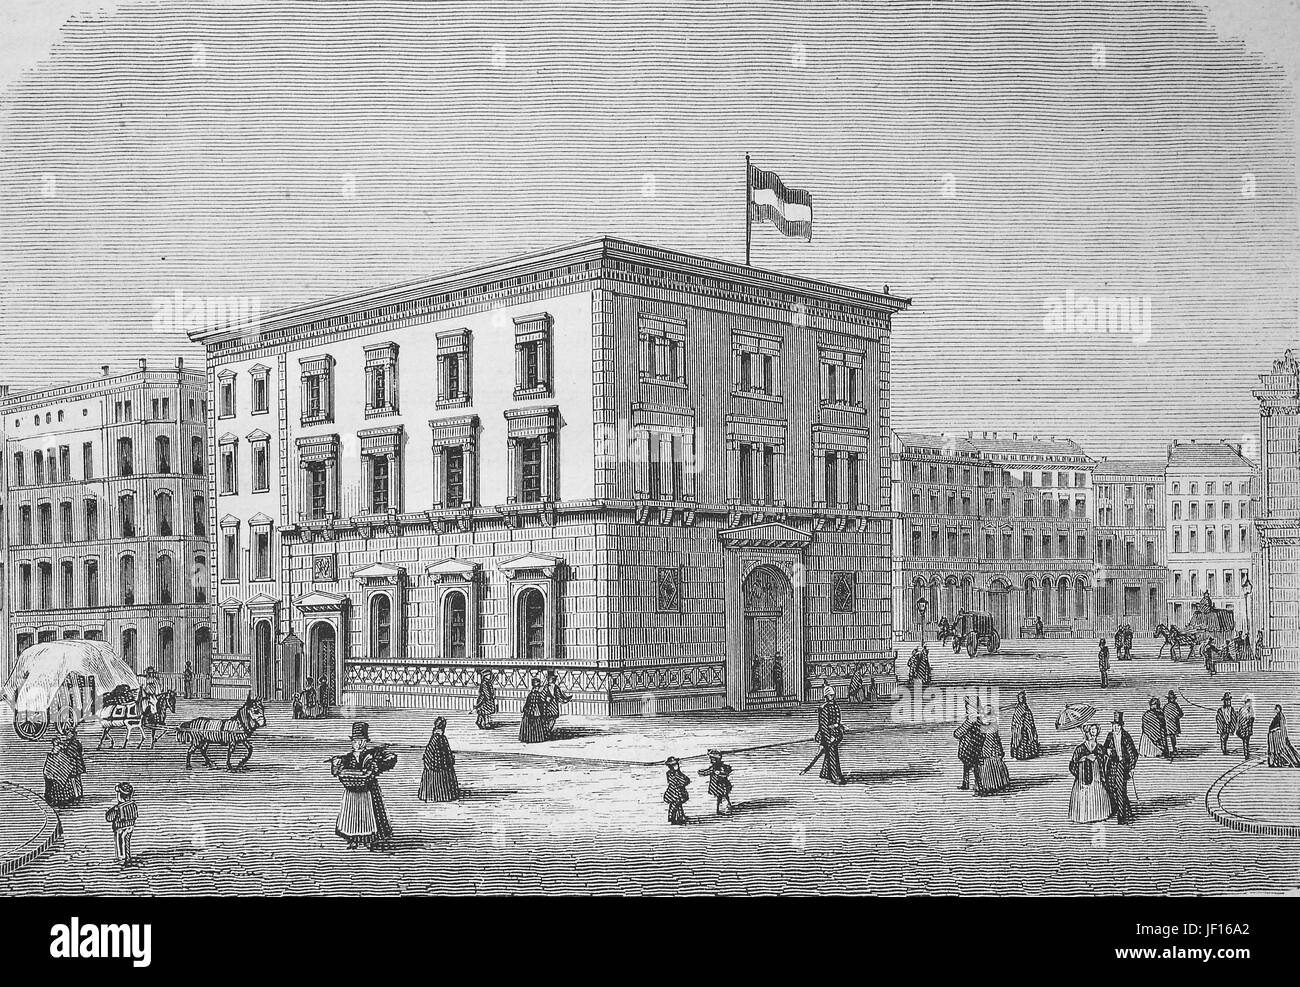 Historical illustration of the olf bank building of Hamburg, Germany, Digital improved reproduction from an original print from 1888 Stock Photo